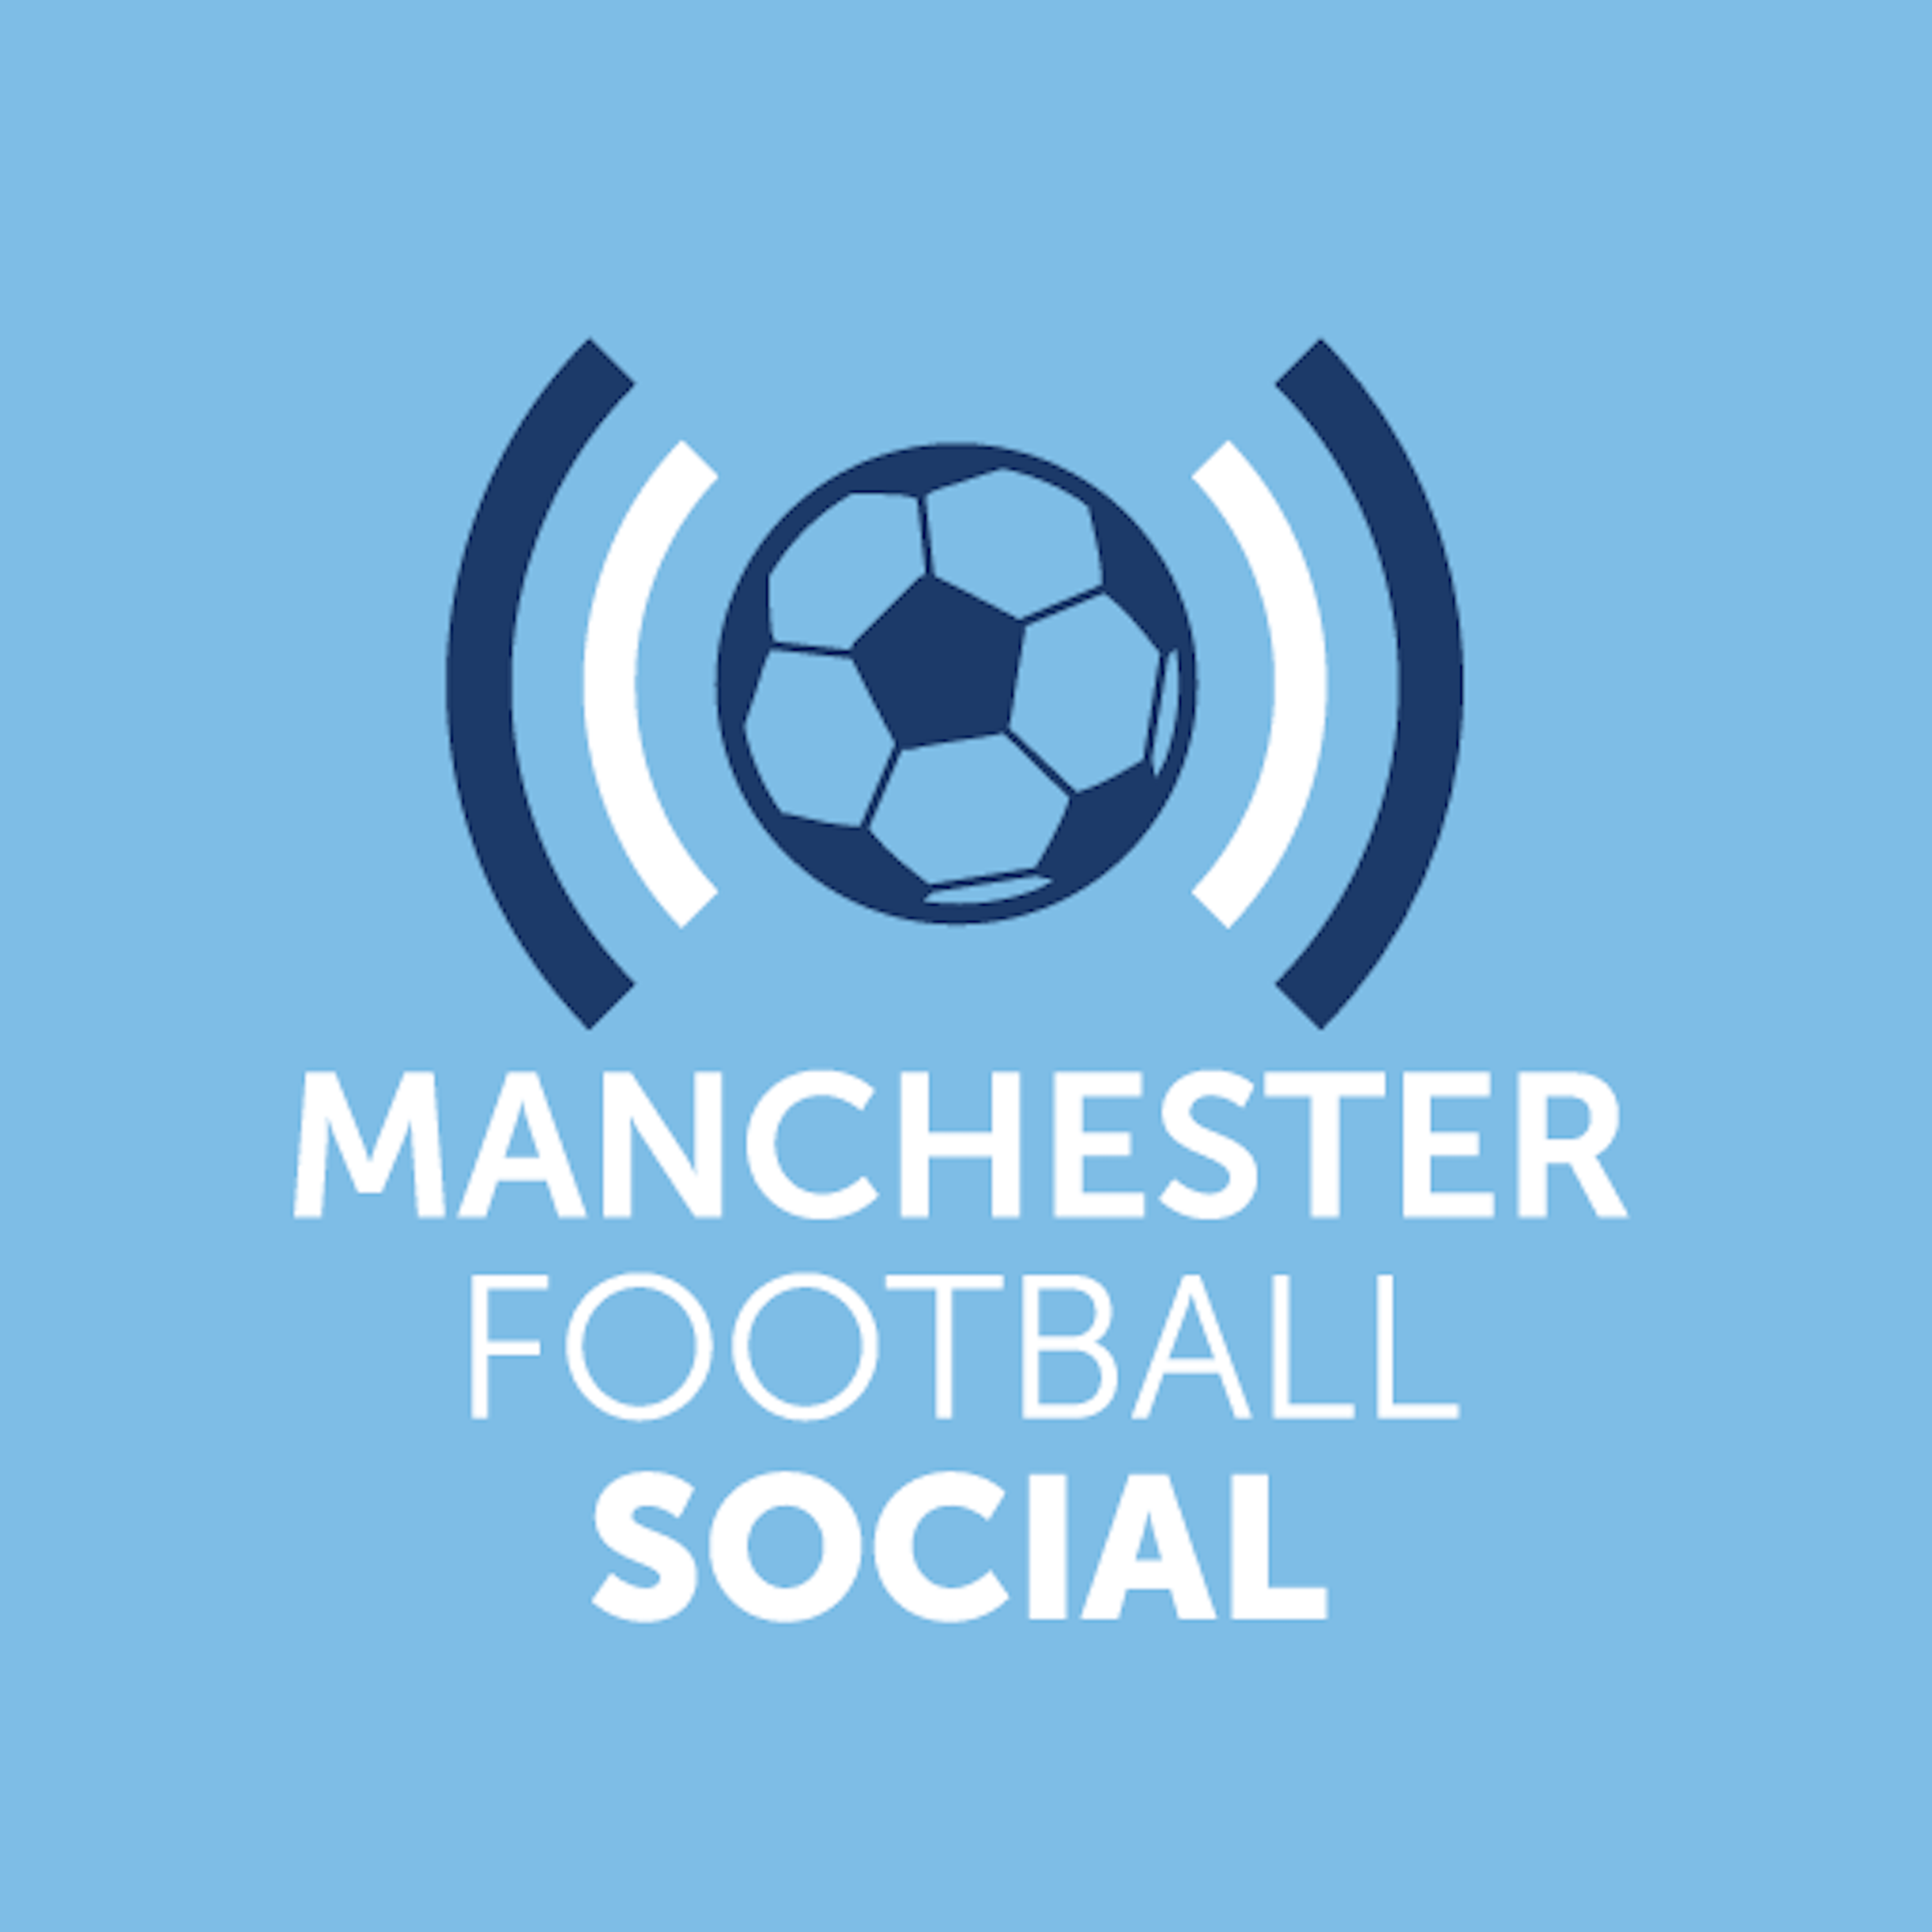 Welcome to the Manchester City Football Social (Trail)